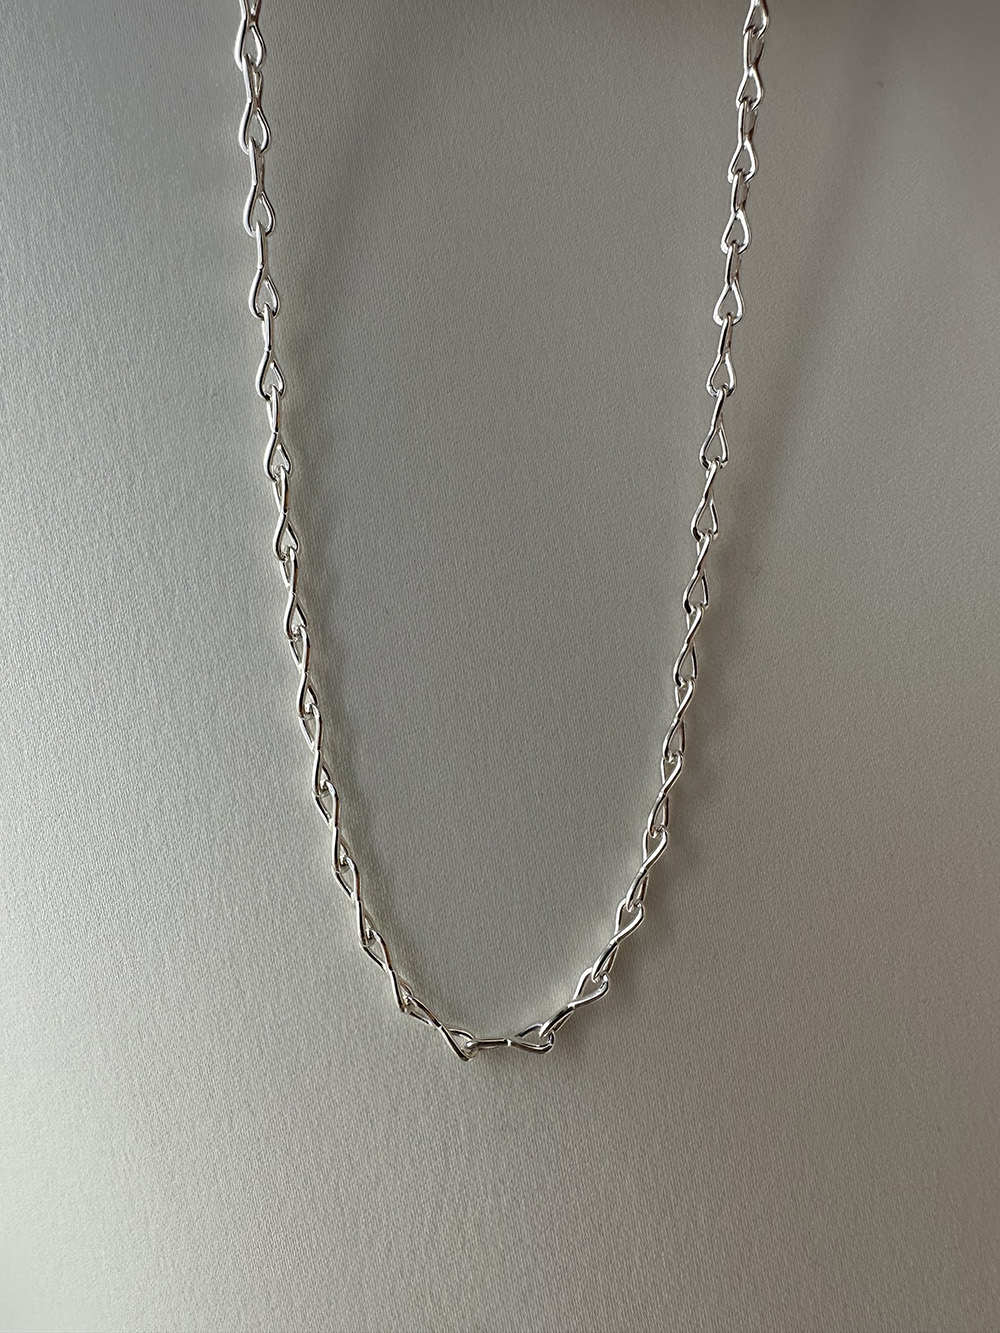 [92.5 silver] Eternity necklace